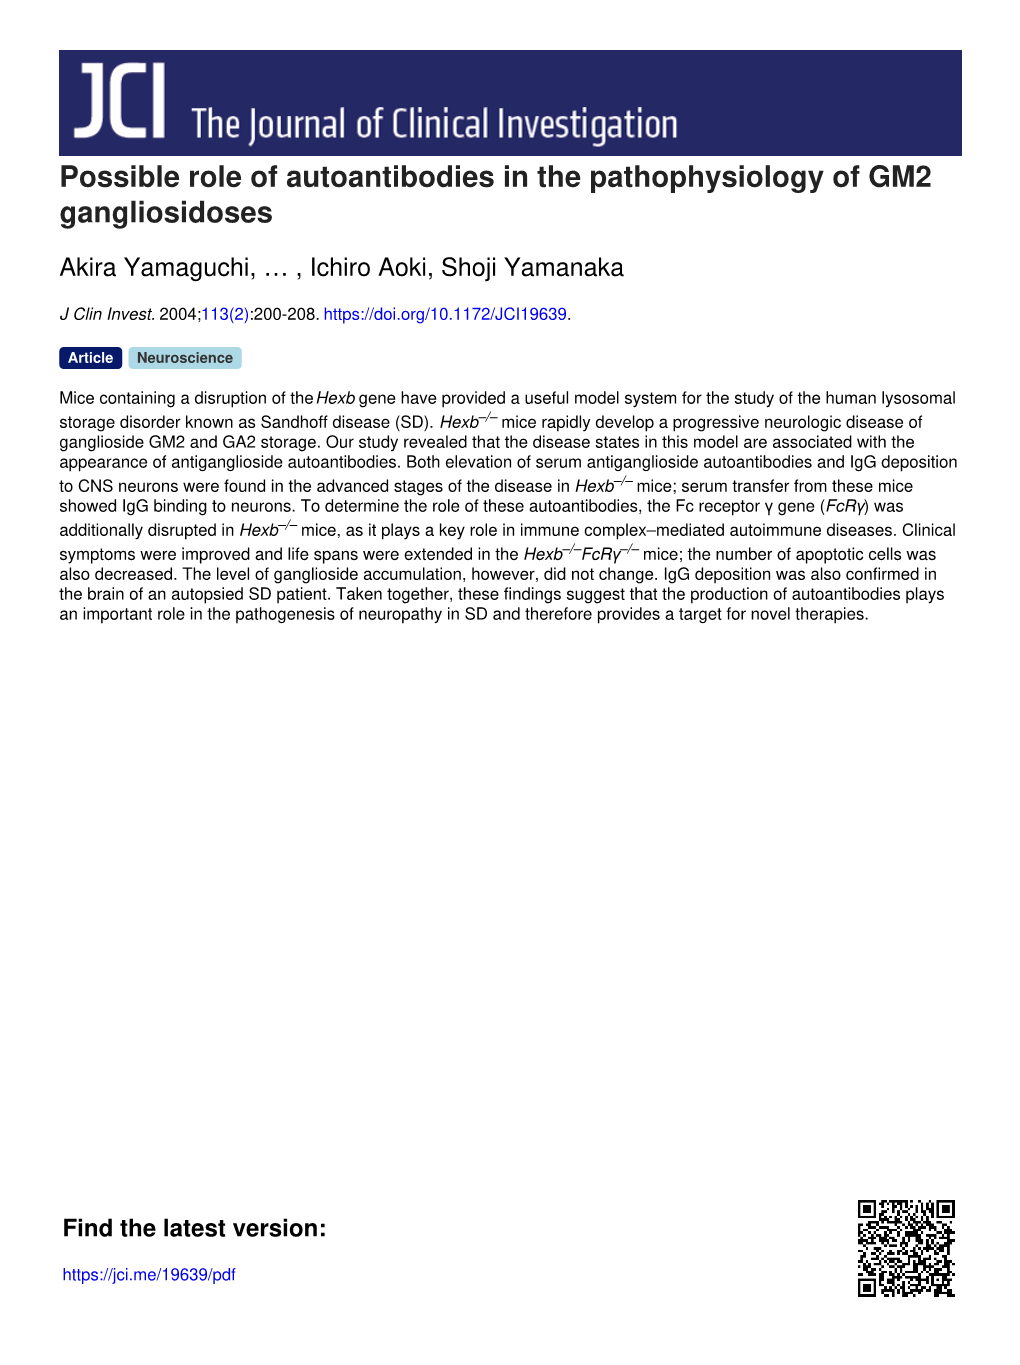 Possible Role of Autoantibodies in the Pathophysiology of GM2 Gangliosidoses